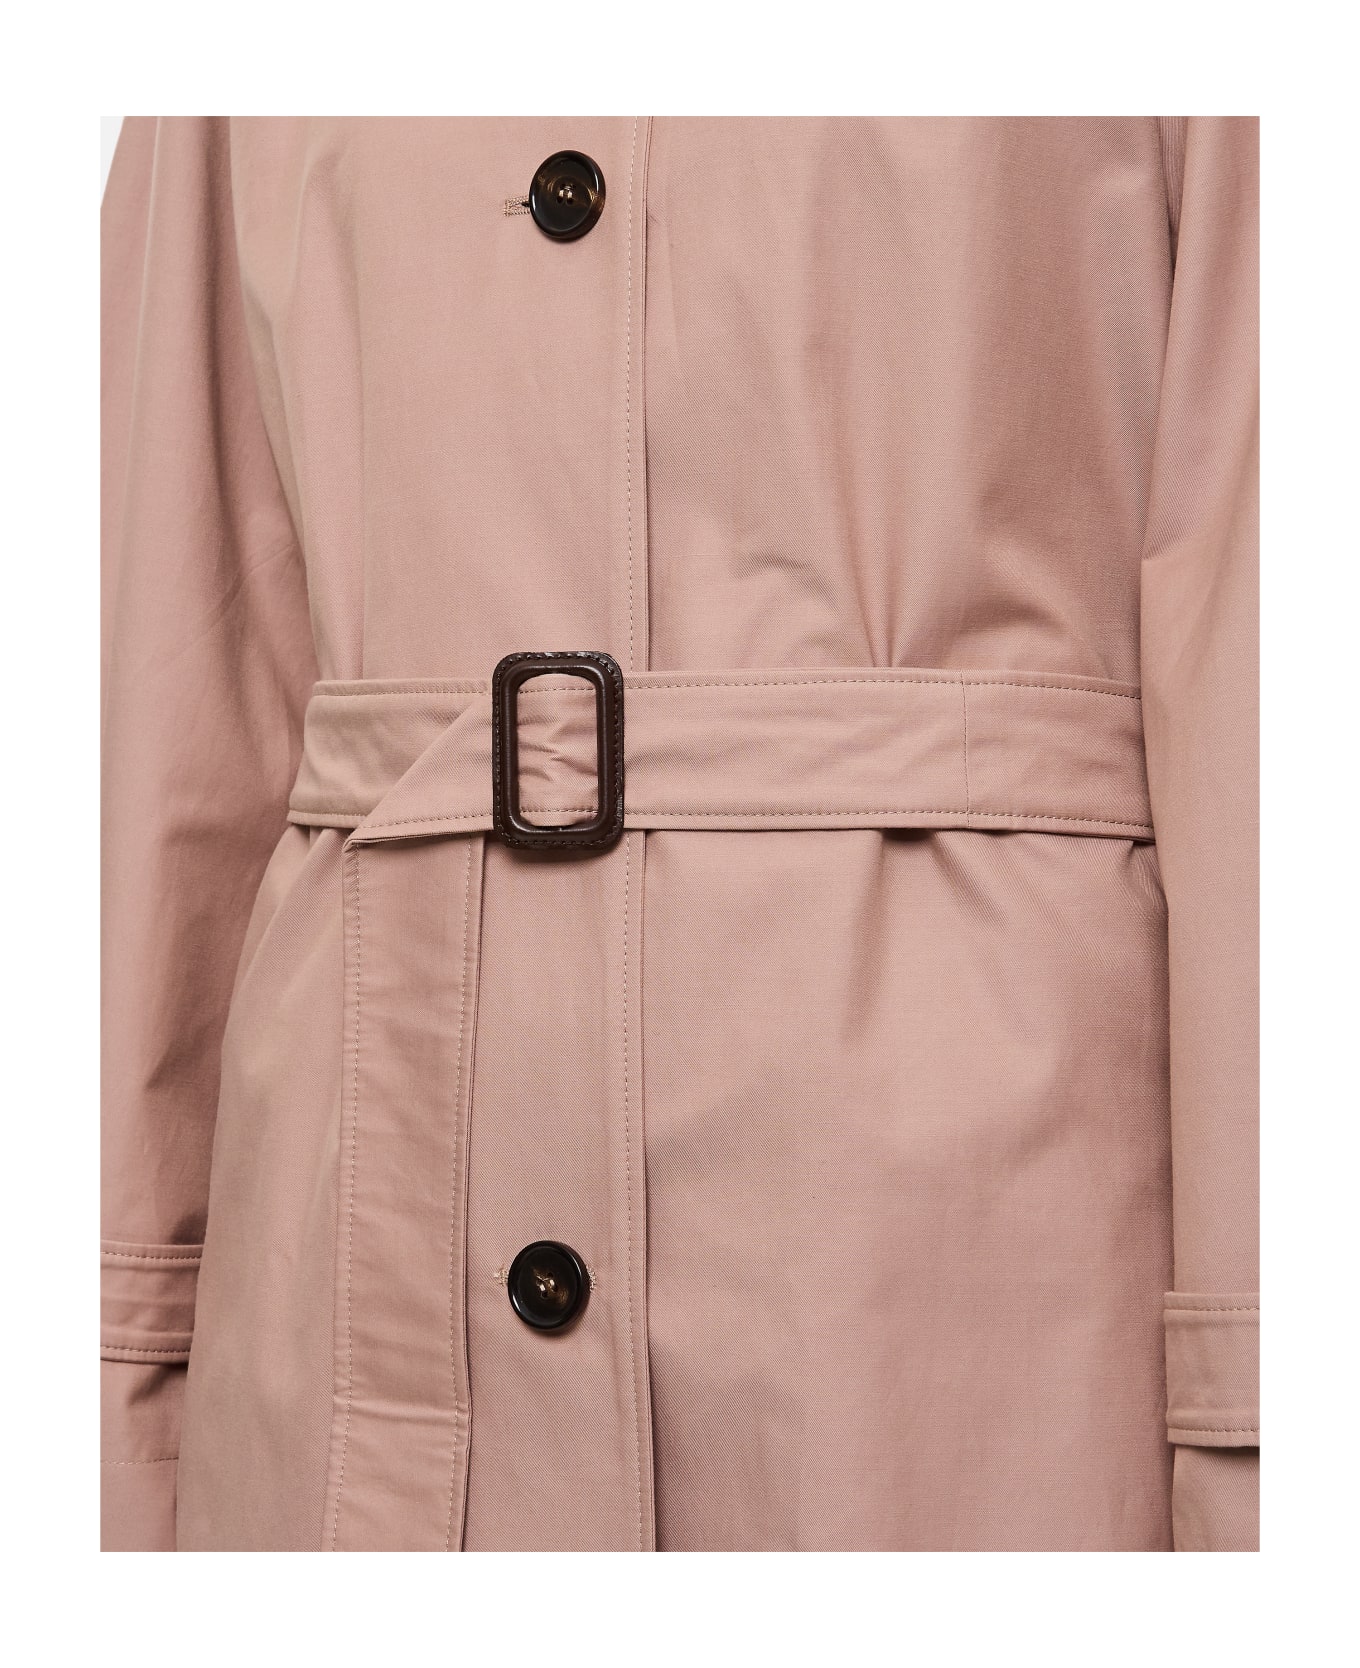 Max Mara The Cube Ftrench Trench Coat - Pink